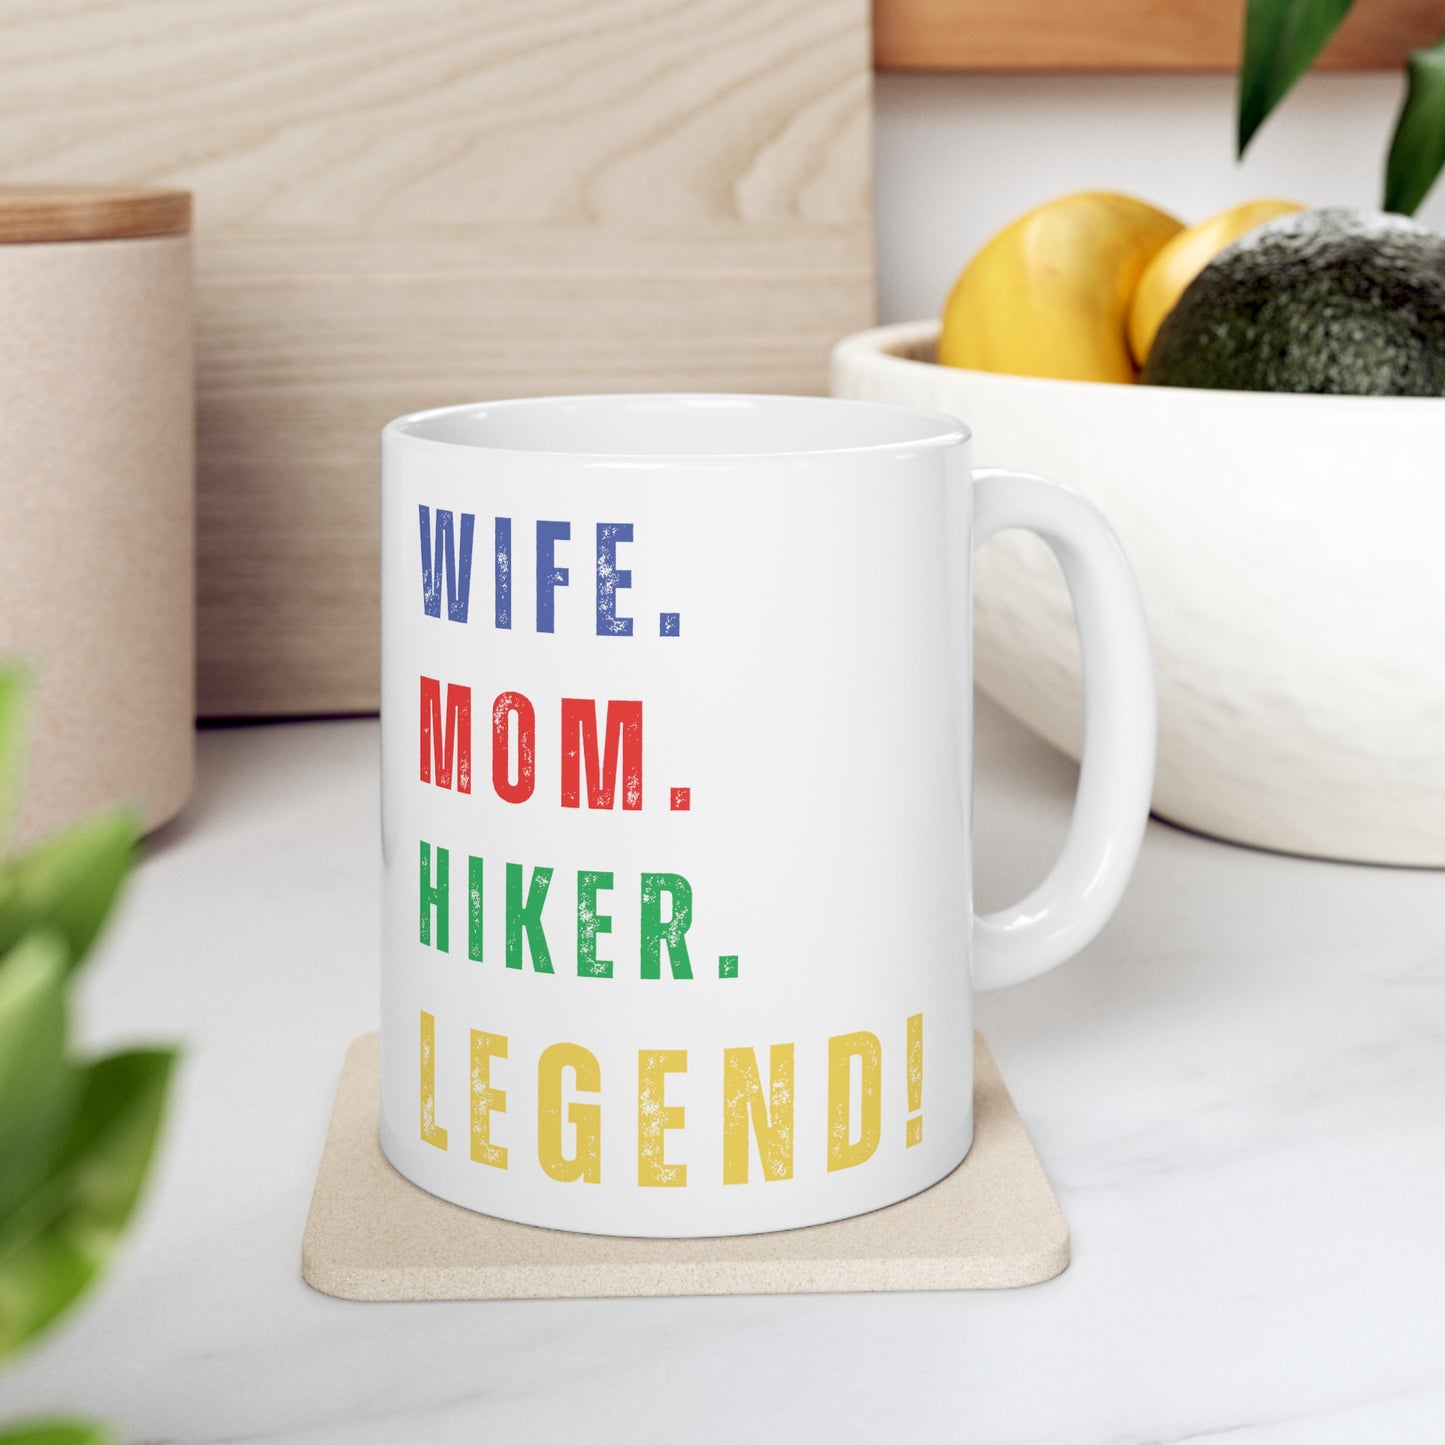 WIFE. MOM. HIKER. LEGEND - Ceramic Mug 11oz - NOT SOLD IN STORES - Birthday, Valentine's Day, Mother's Day - ANY DAY!